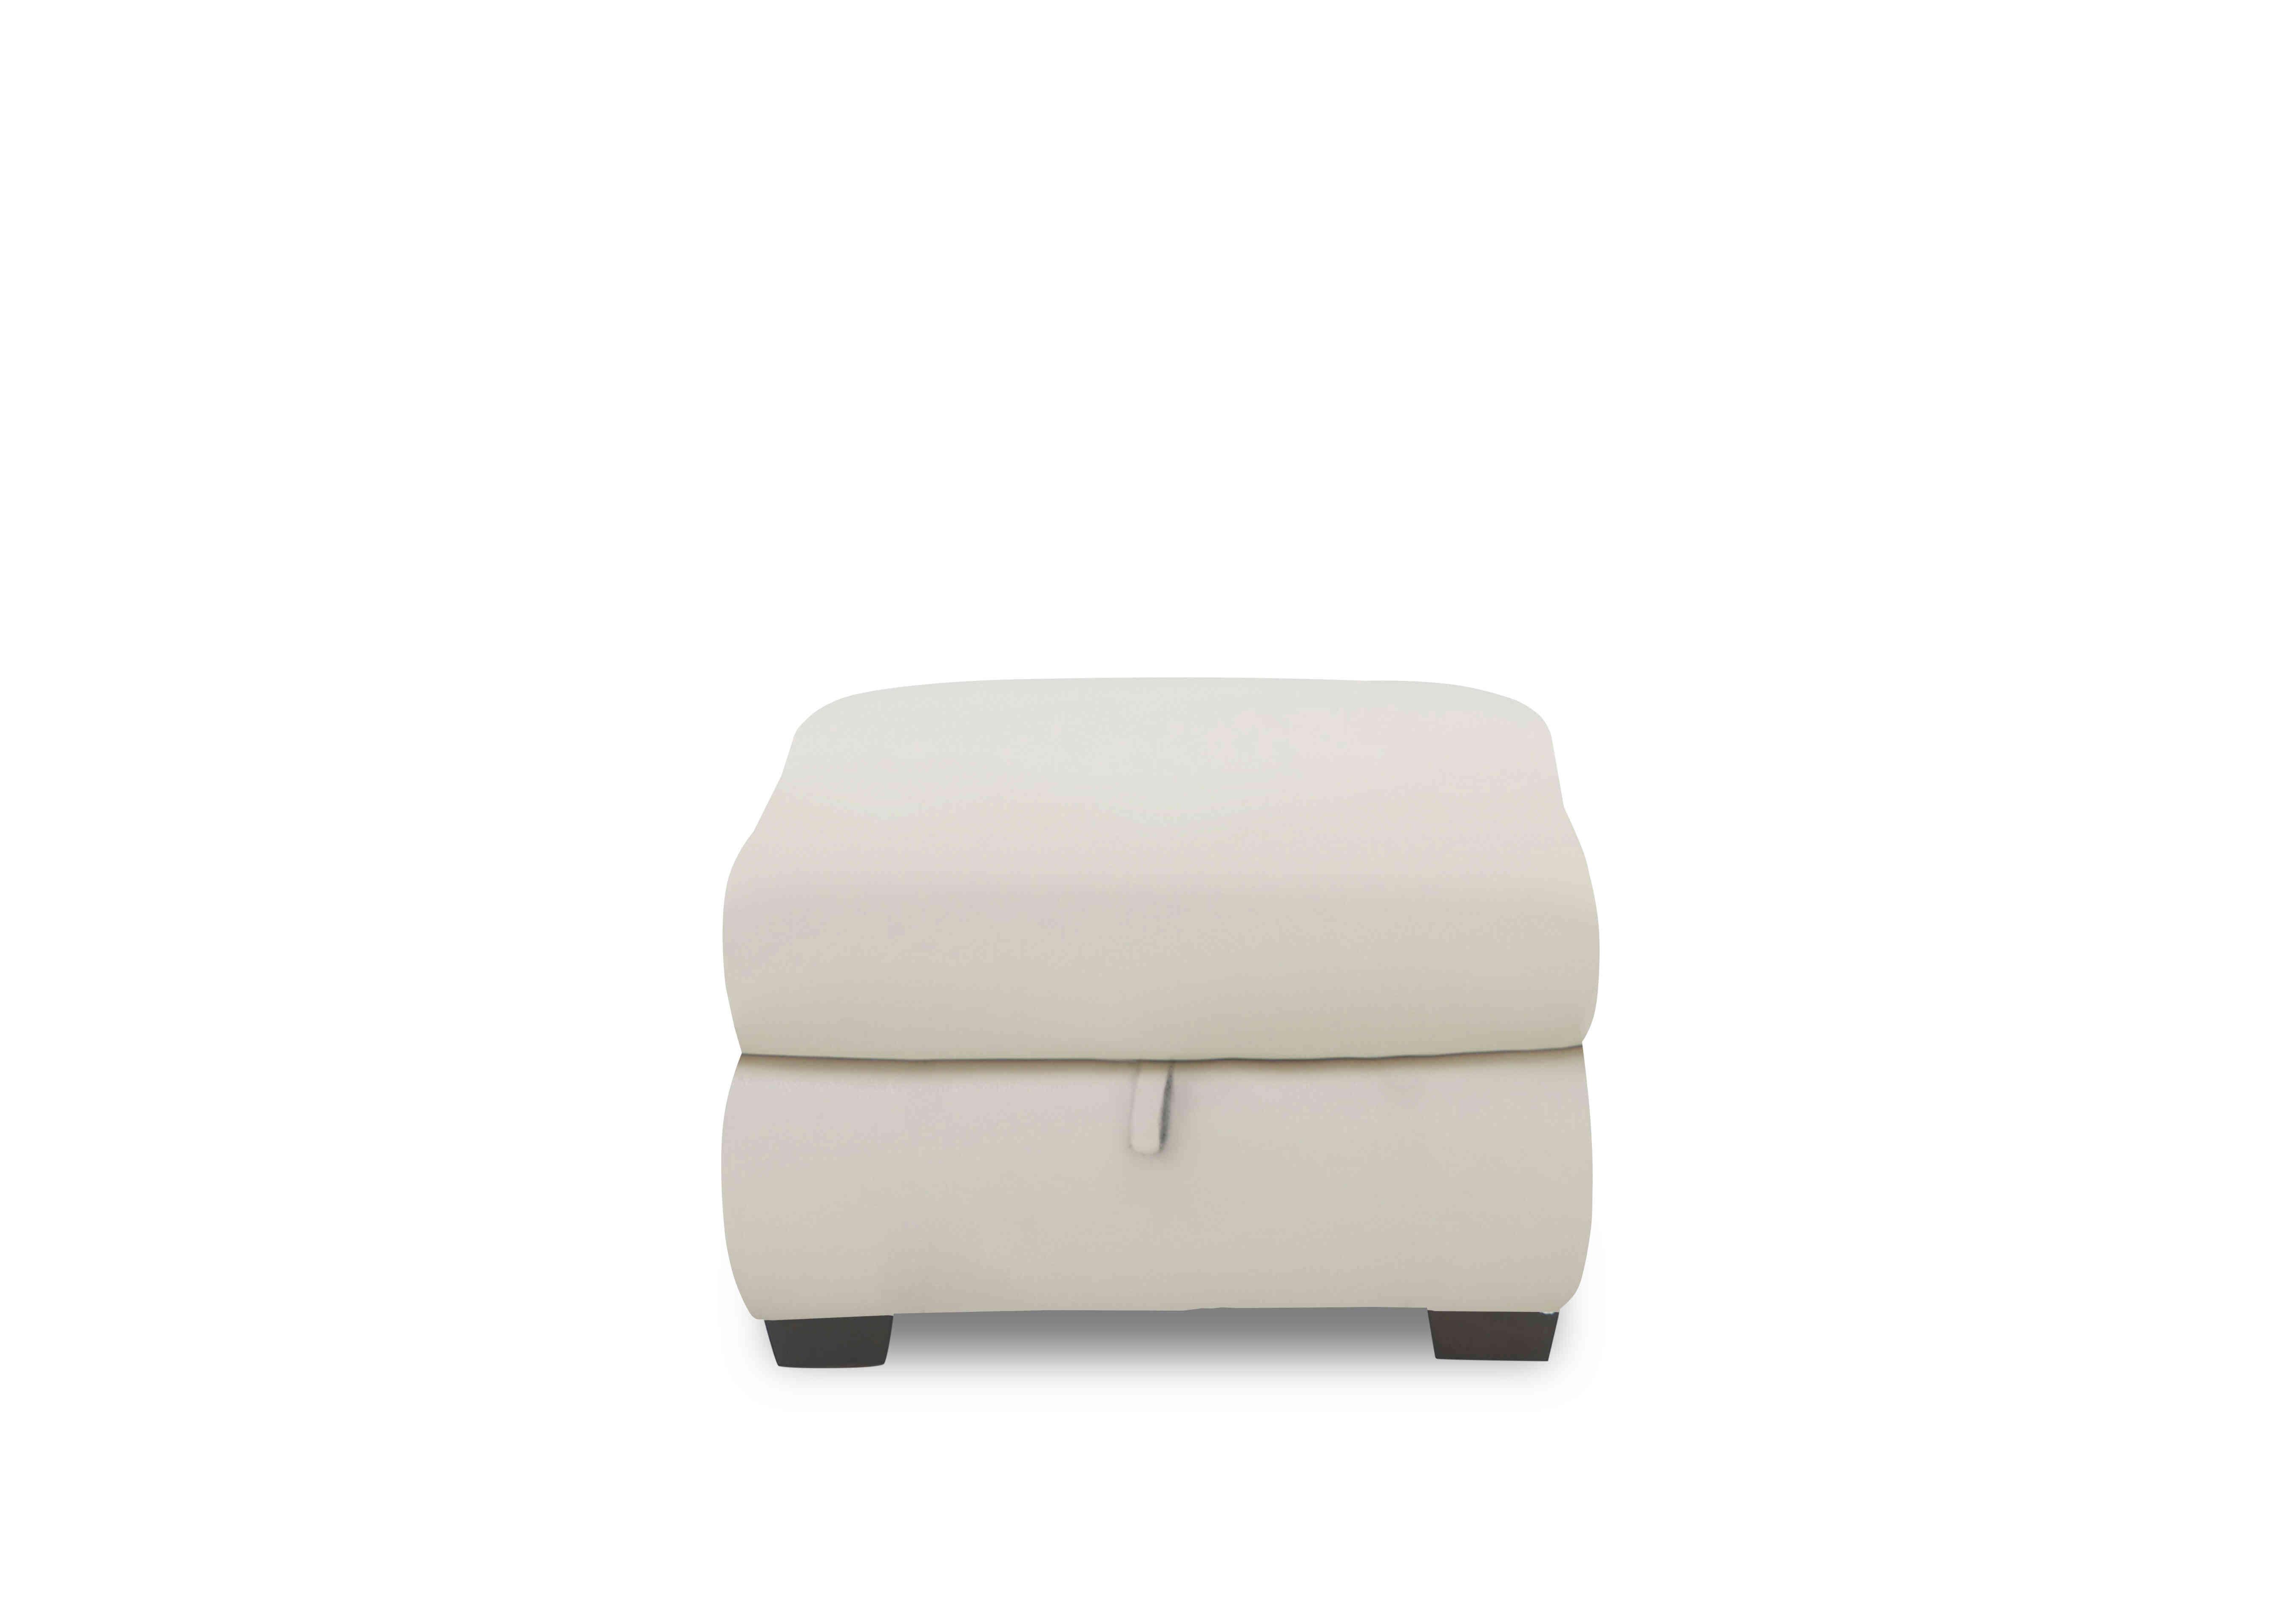 Nixon Leather Storage Footstool in Nc-156e Frost on Furniture Village